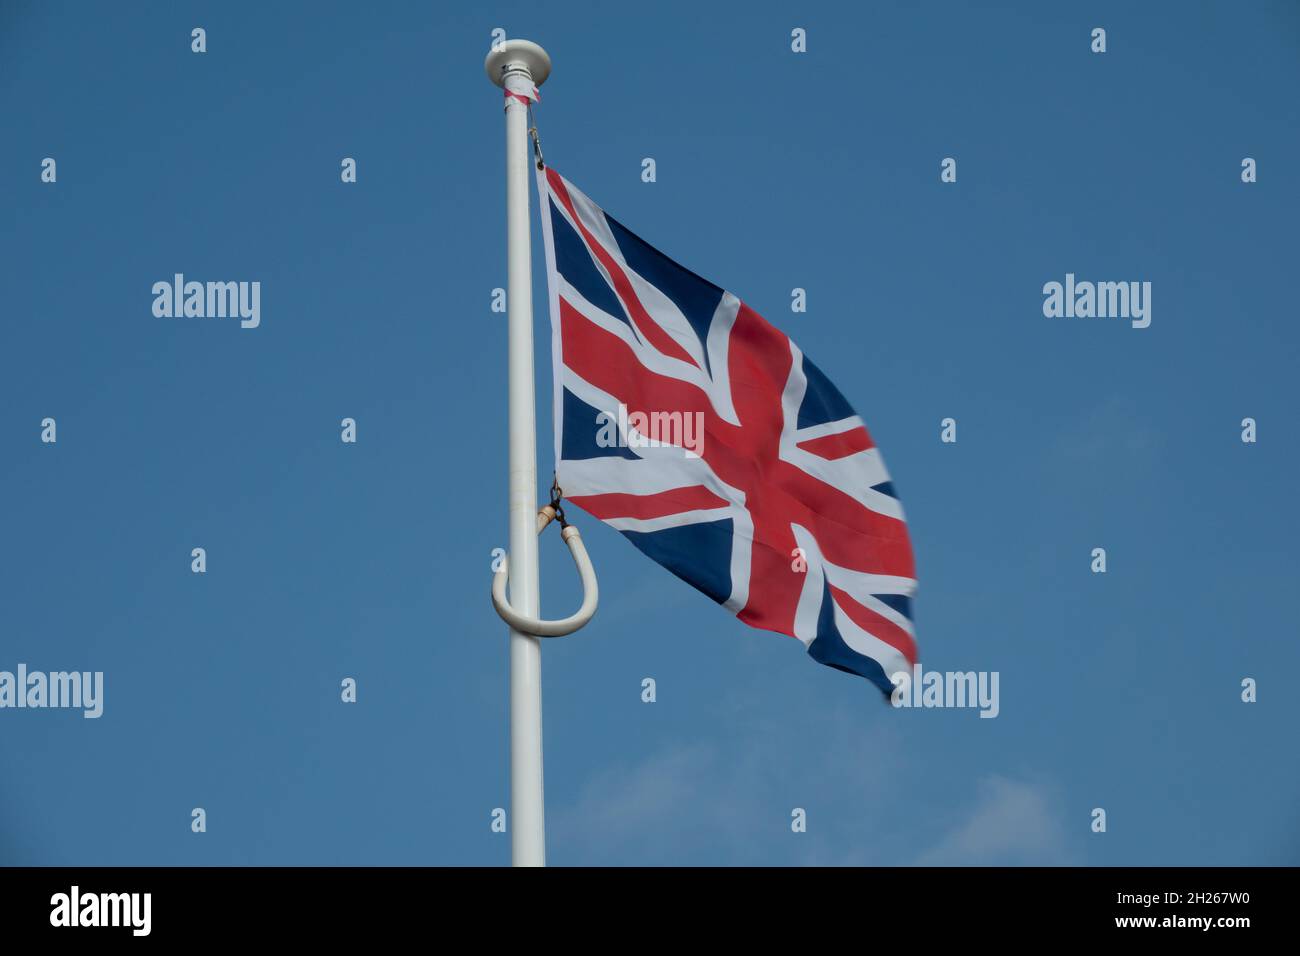 A union jack flag flying from a white flag pole against a blue sky Stock Photo